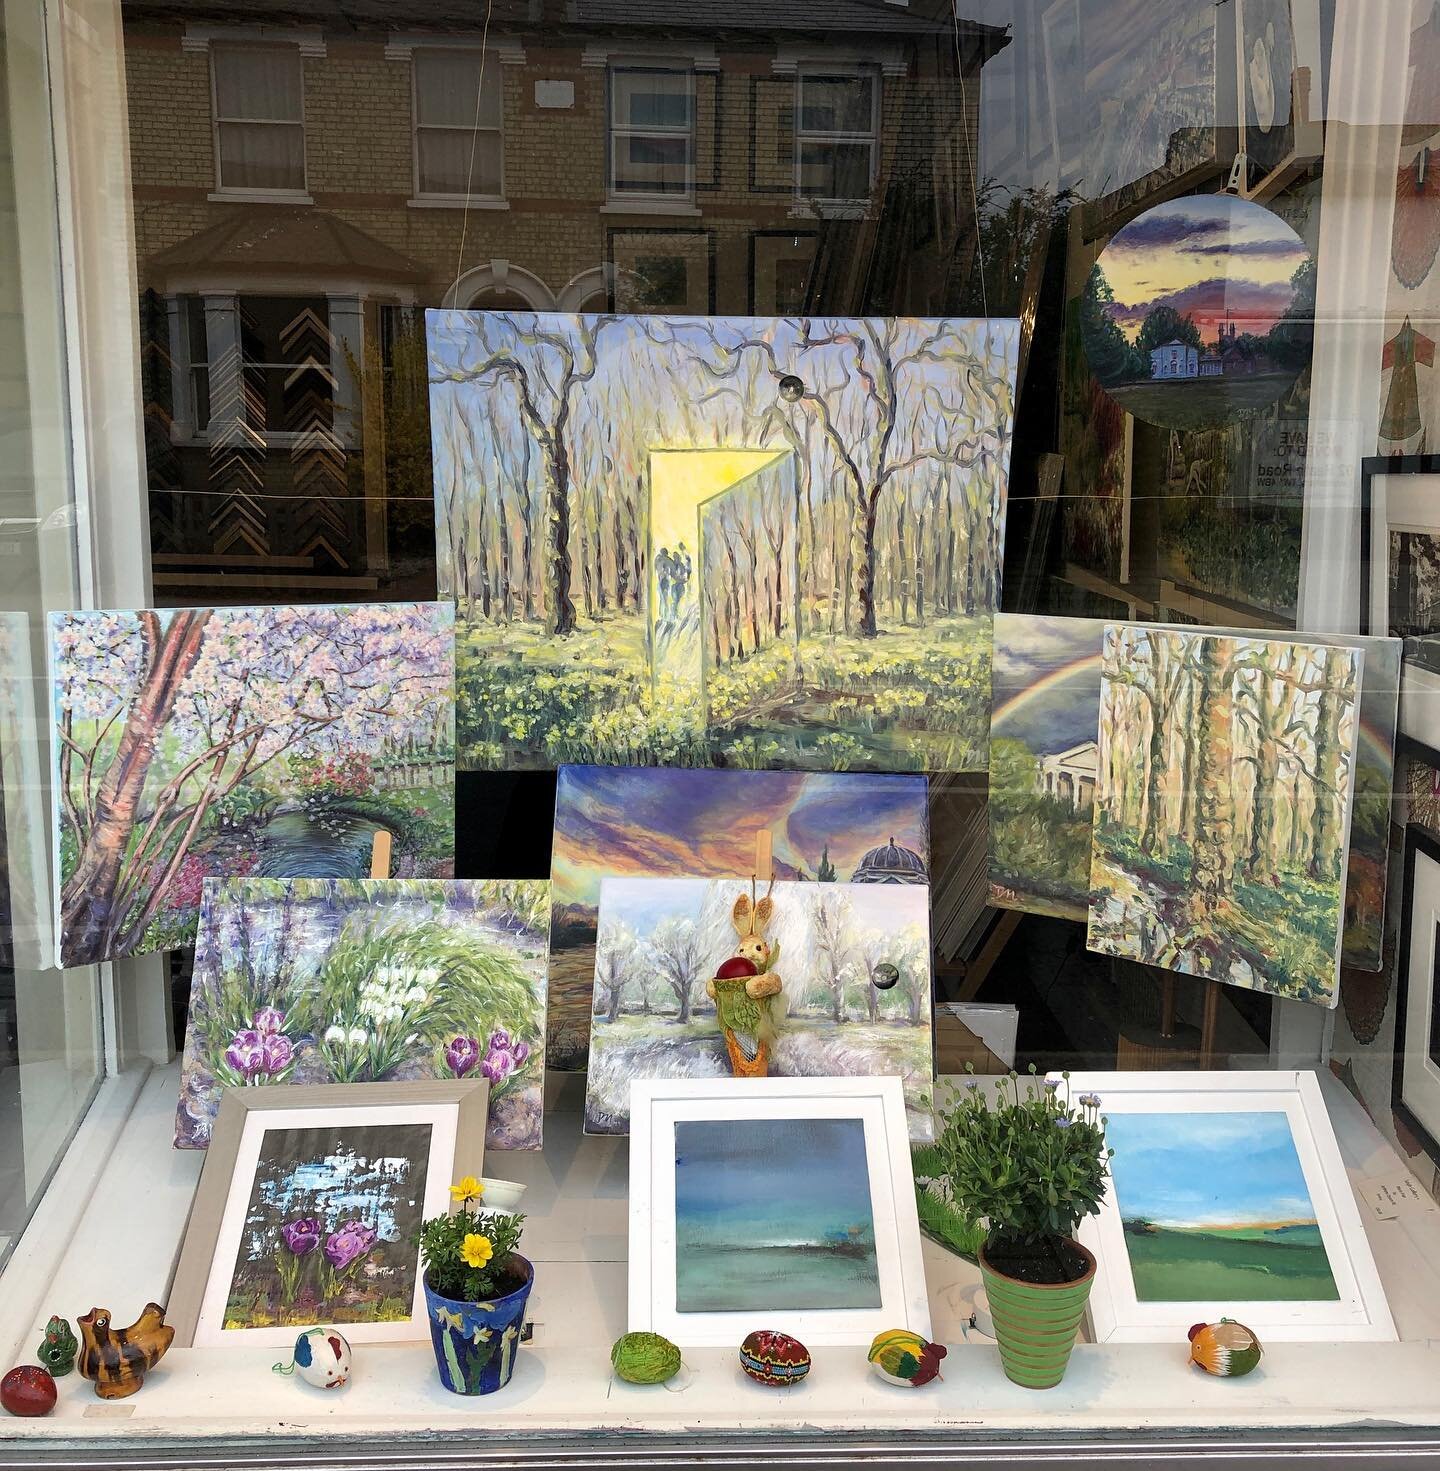 Happy Easter! We had the Easter bunny visit in the window, joining the Theatre of Easter with the unveiling of the Secret Door, the latest painting in Lockdown 3 by @doinamoss Doina Moss.  Oil on canvas 76x61cm, waiting in the queue to be framed!  ht